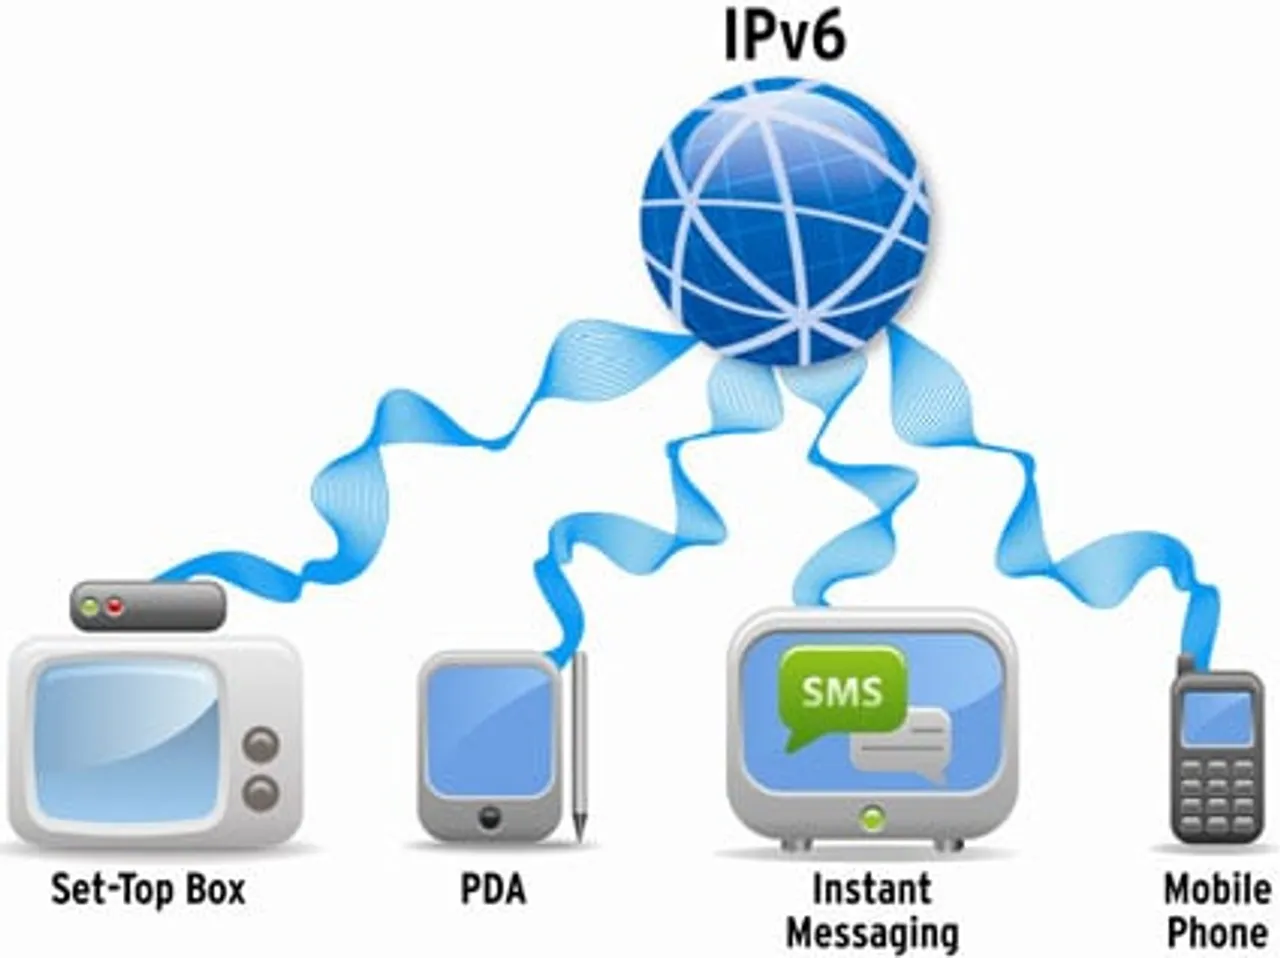 Allied Telesis Achieves IPv6 Ready Compliance for New Products